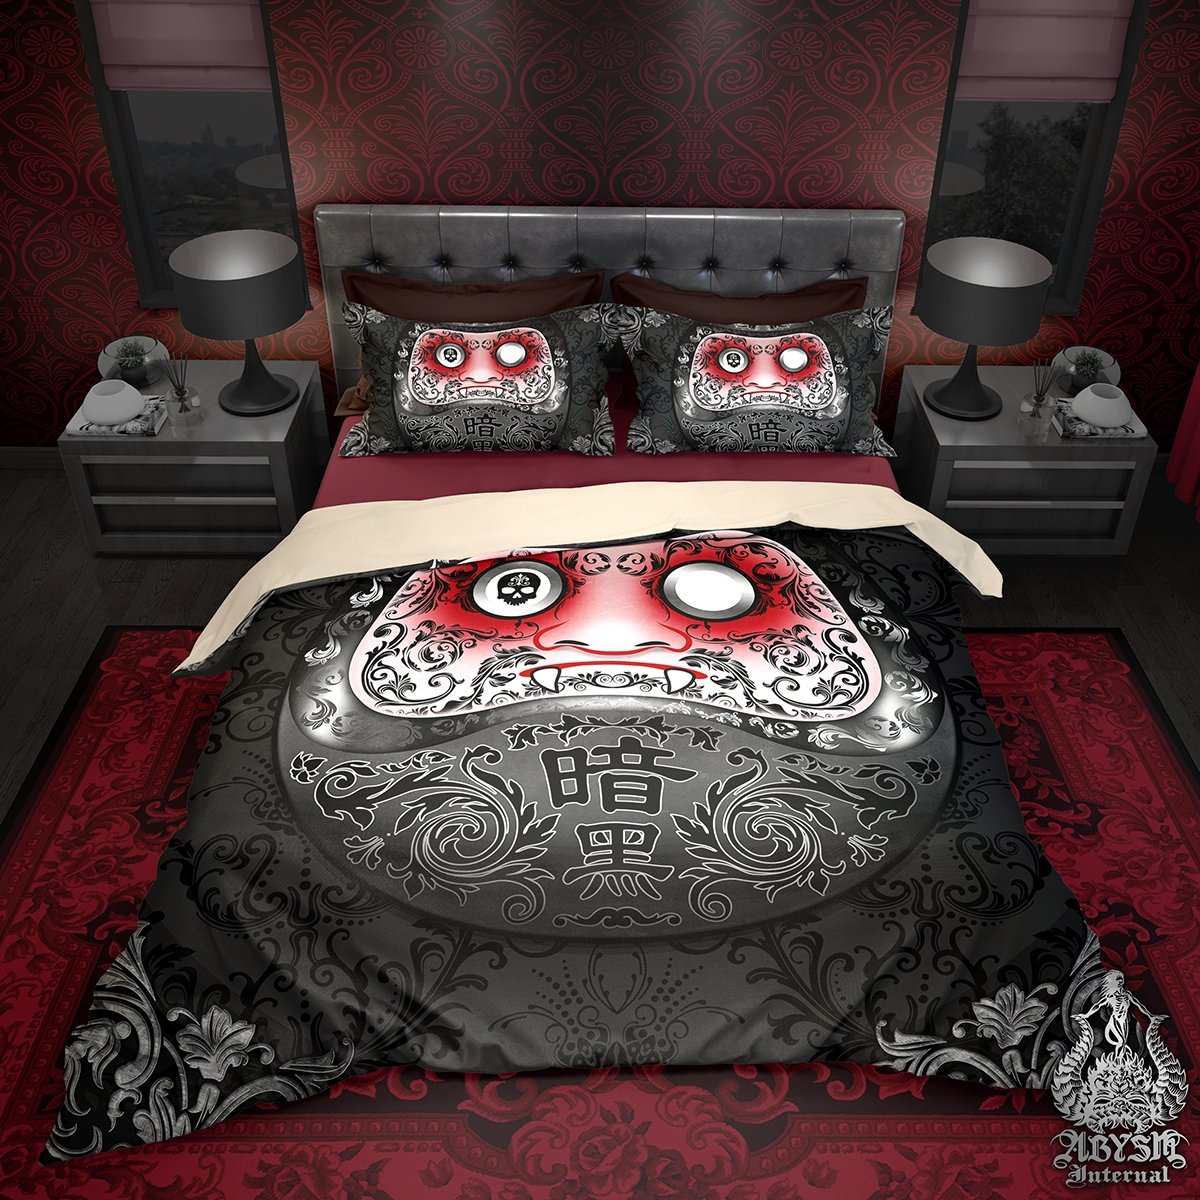 Daruma Bedding Set, Comforter and Duvet, Funny Gothic Bed Cover and Bedroom Decor, King, Queen and Twin Size - Japanese Art - Abysm Internal